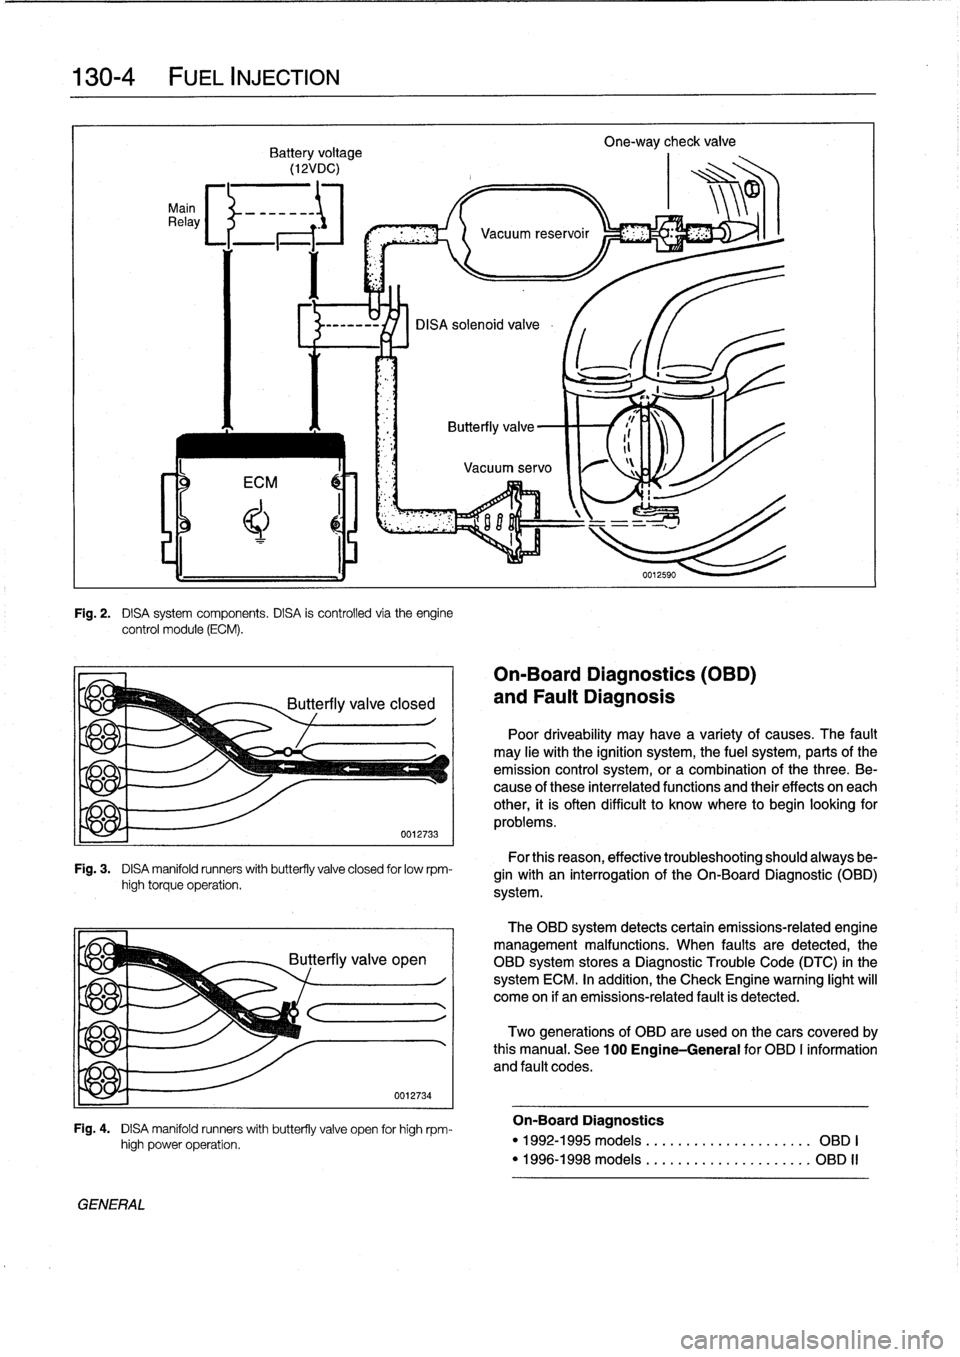 BMW 318i 1997 E36 User Guide 
130-
4

	

FUEL
INJECTION

Main
Relay

Fig
.
2
.

	

DISA
system
components
.
DISA
is
controlled
via
theengine
control
module
(ECM)
.

Fig
.
3
.

	

DISA
manifold
runners
with
butterfly
valve
closed
